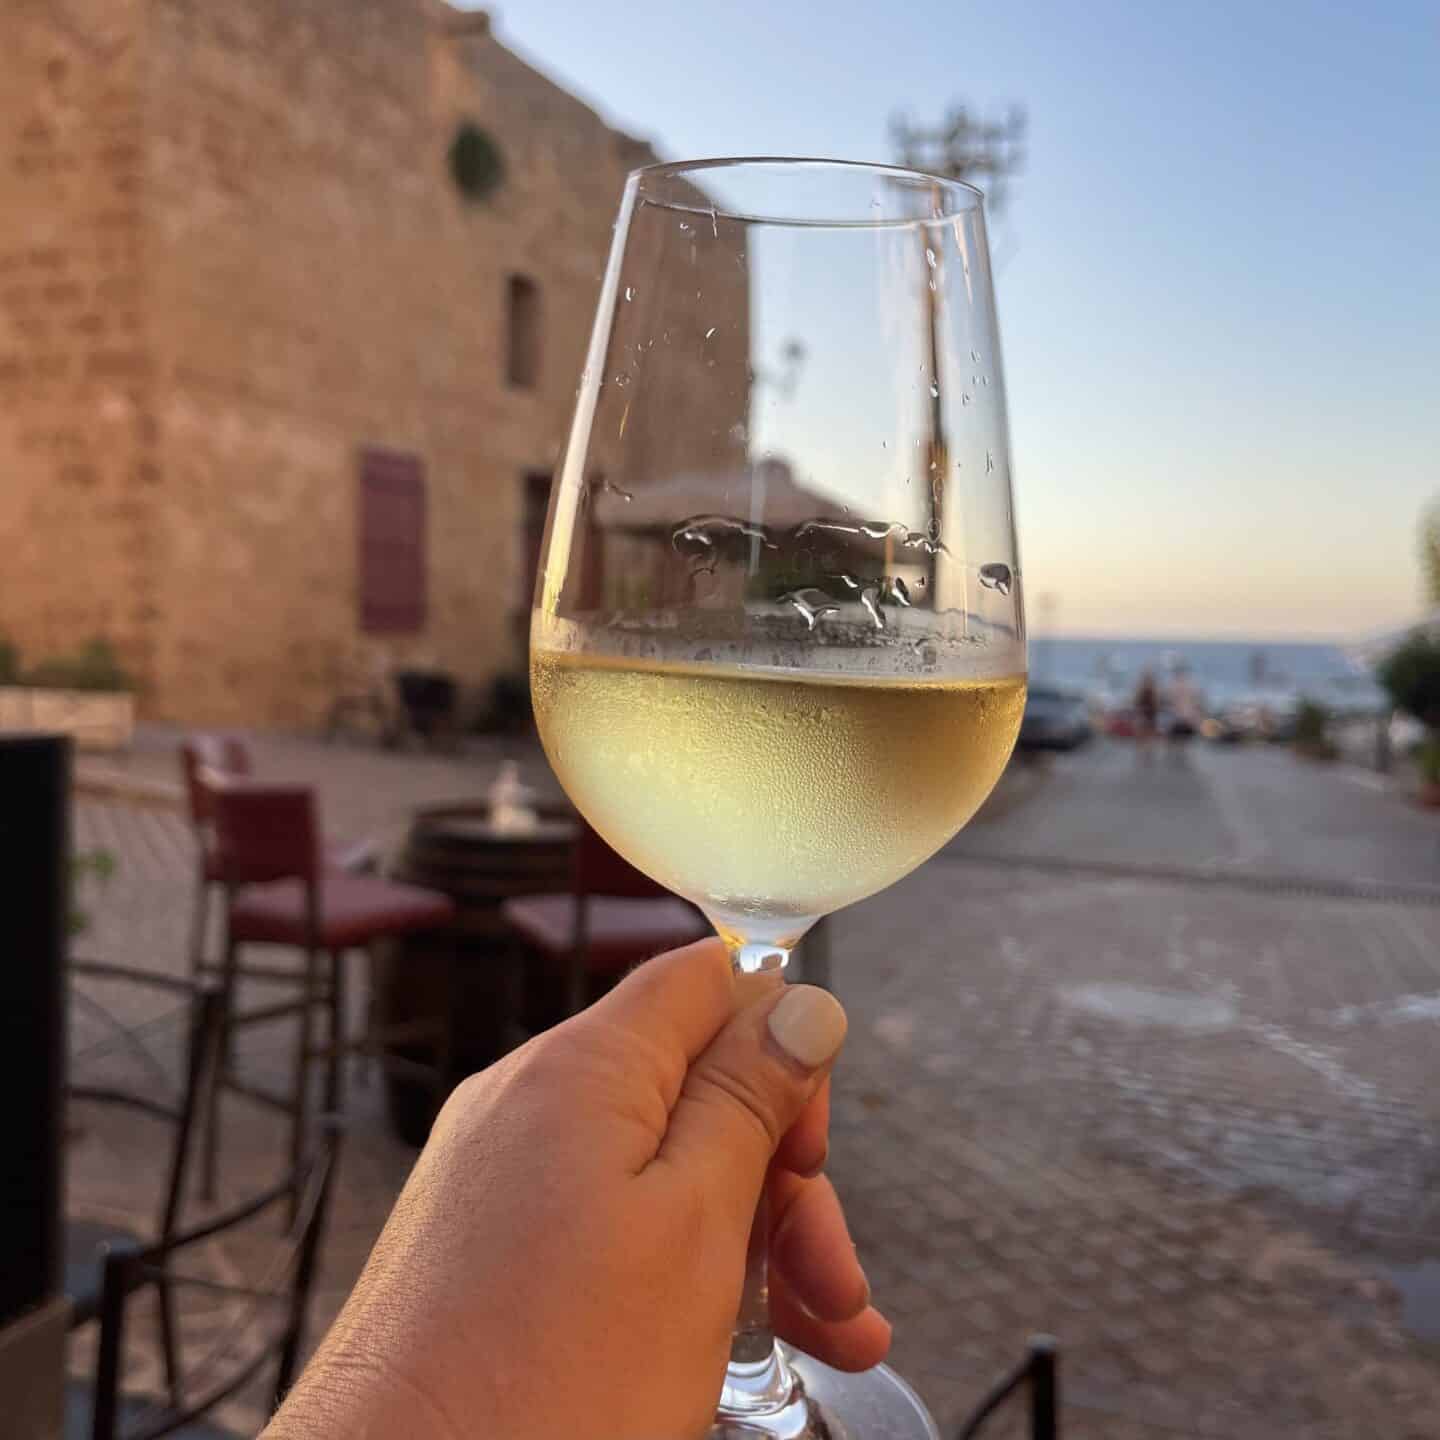 A woman holding up a glass of wine in Rhodes Greece